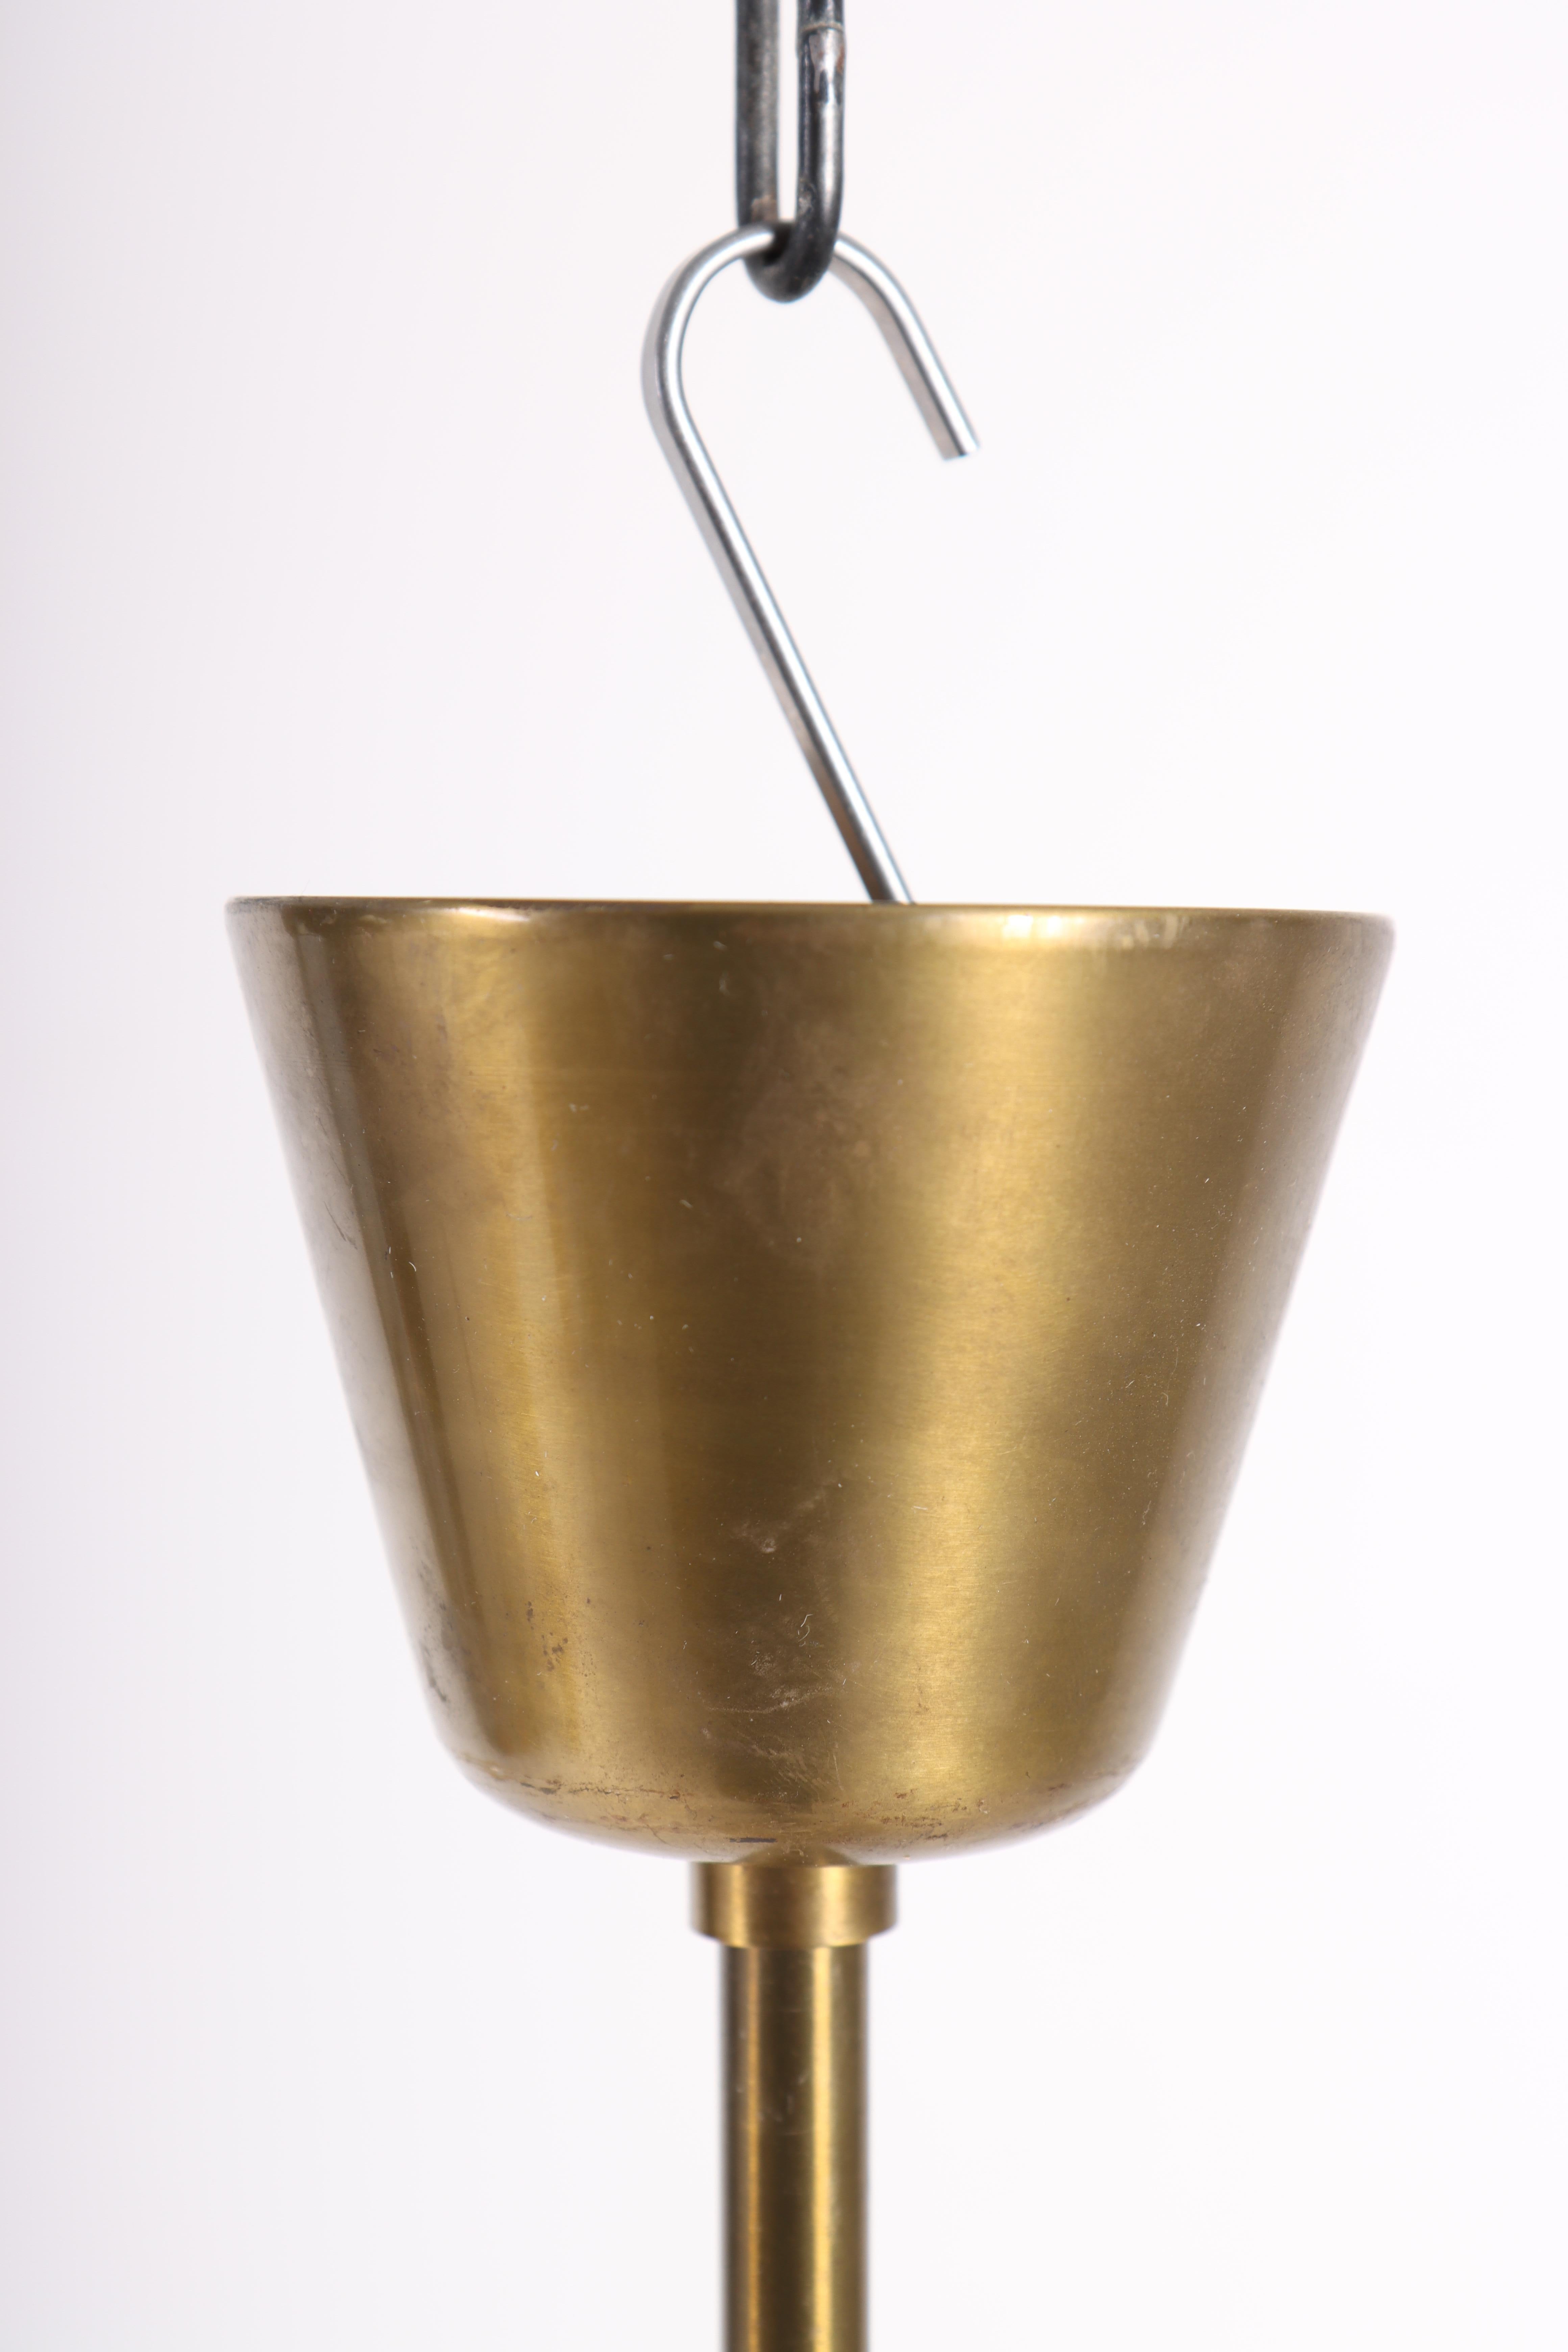 Midcentury Ceiling Lamp in Brass by Harald Notini, 1950s For Sale 2